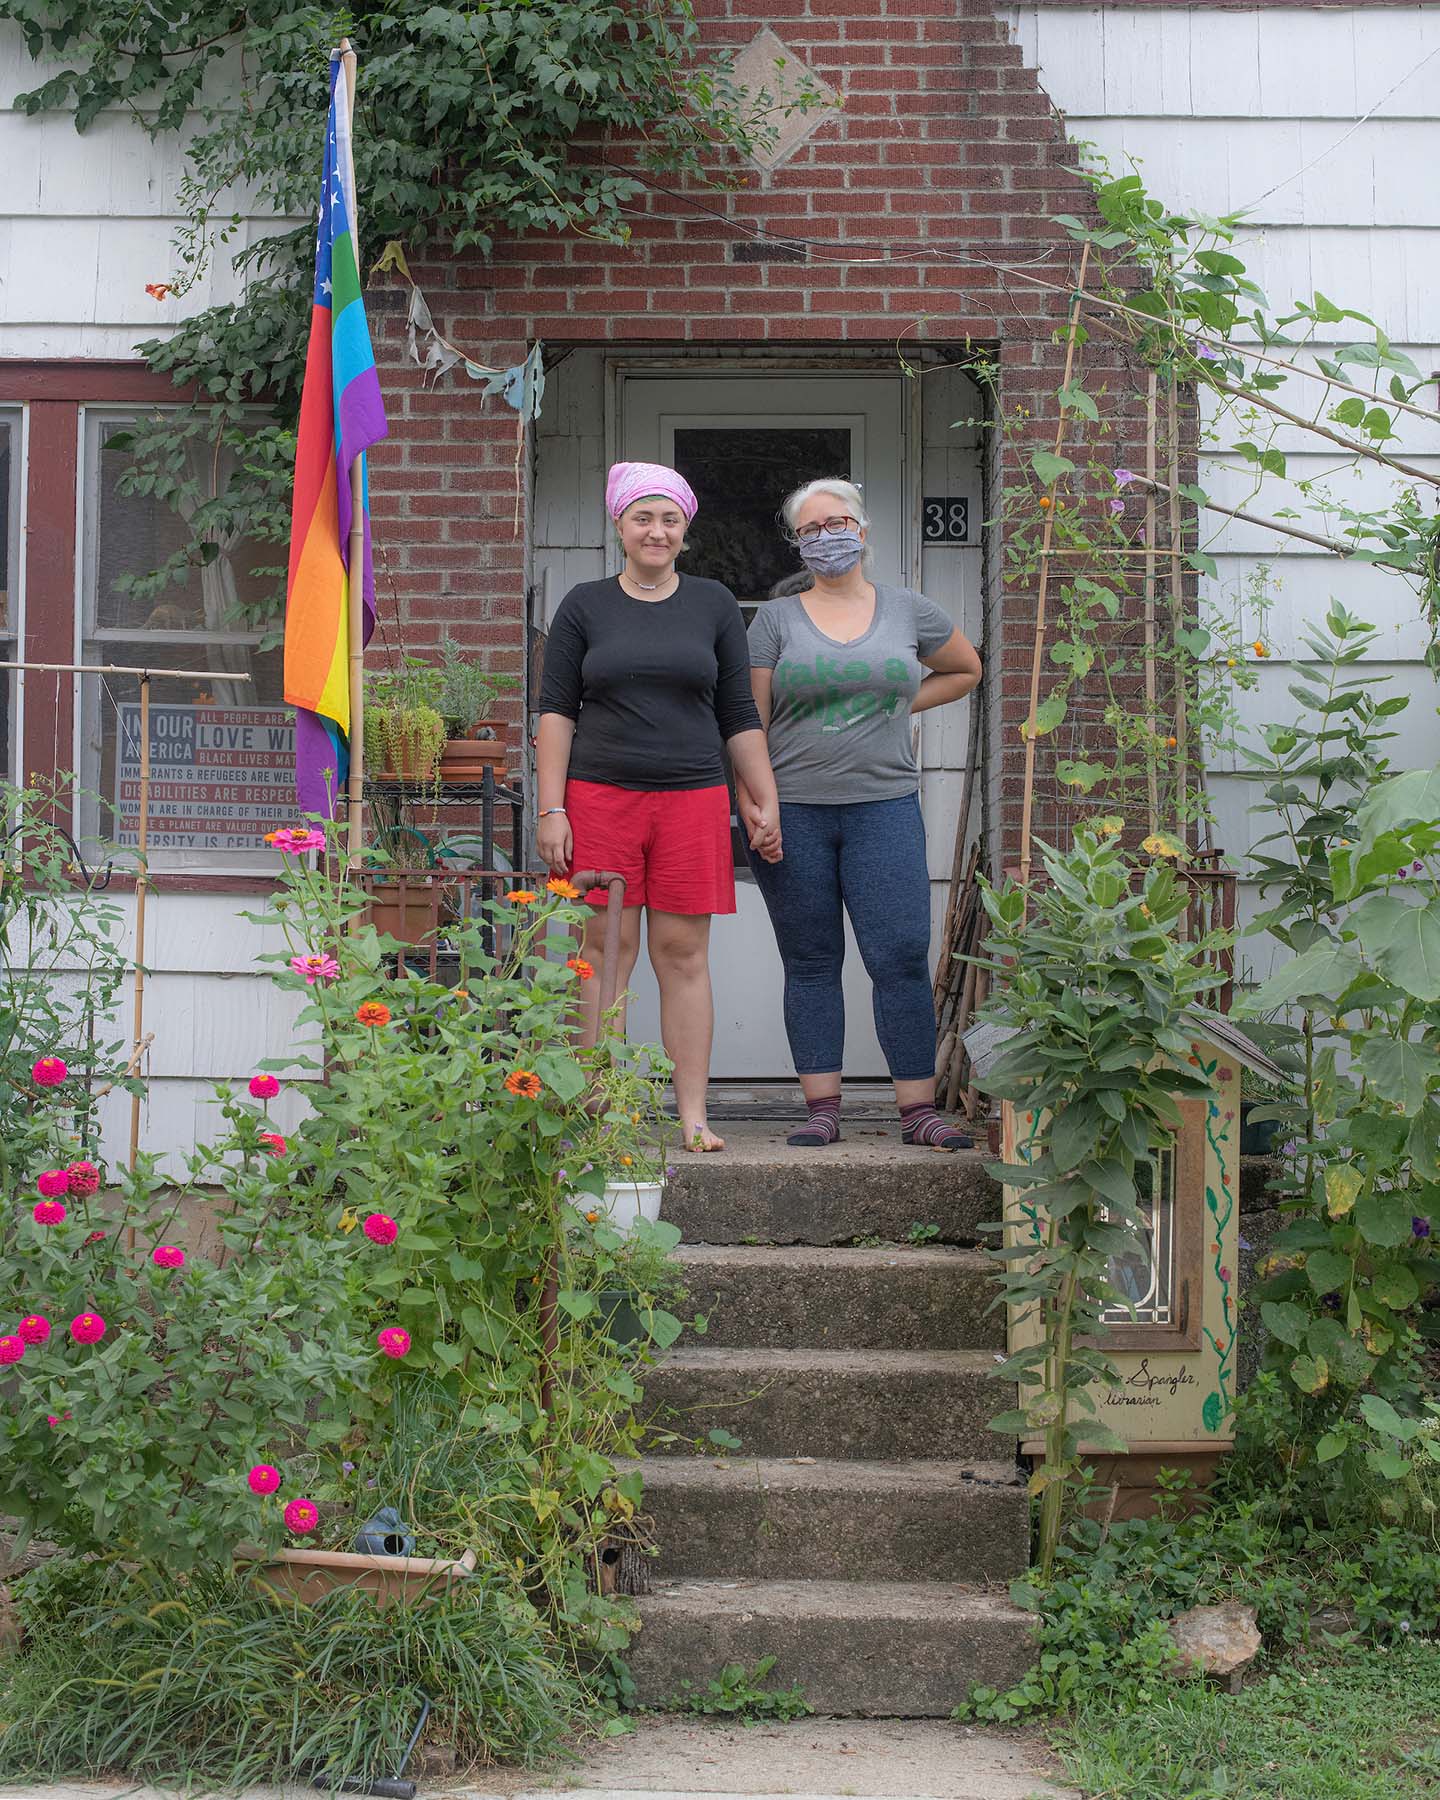 Rio Dennis and Debra Spangler on the front porch of their home displaying the pride flag